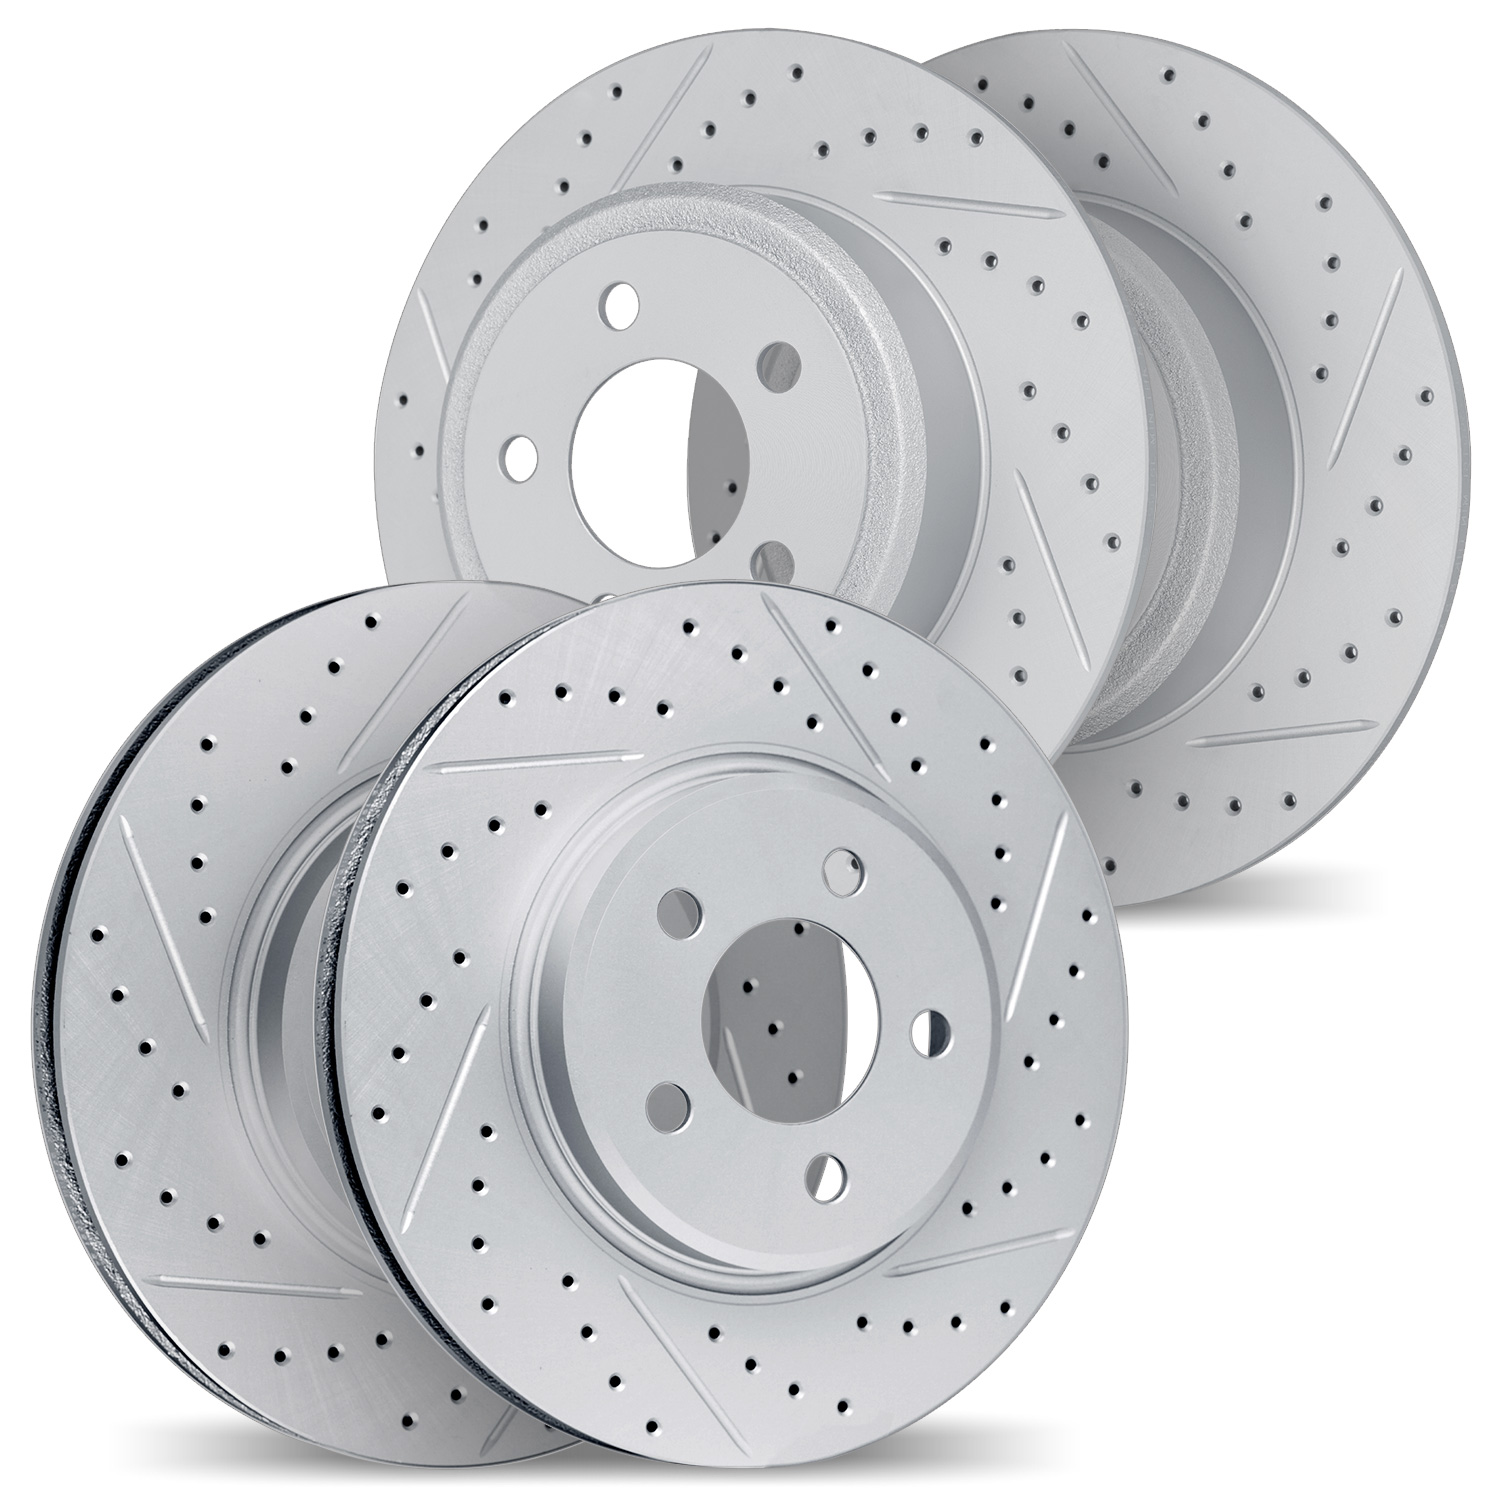 2004-63000 Geoperformance Drilled/Slotted Brake Rotors, 2001-2011 Multiple Makes/Models, Position: Front and Rear